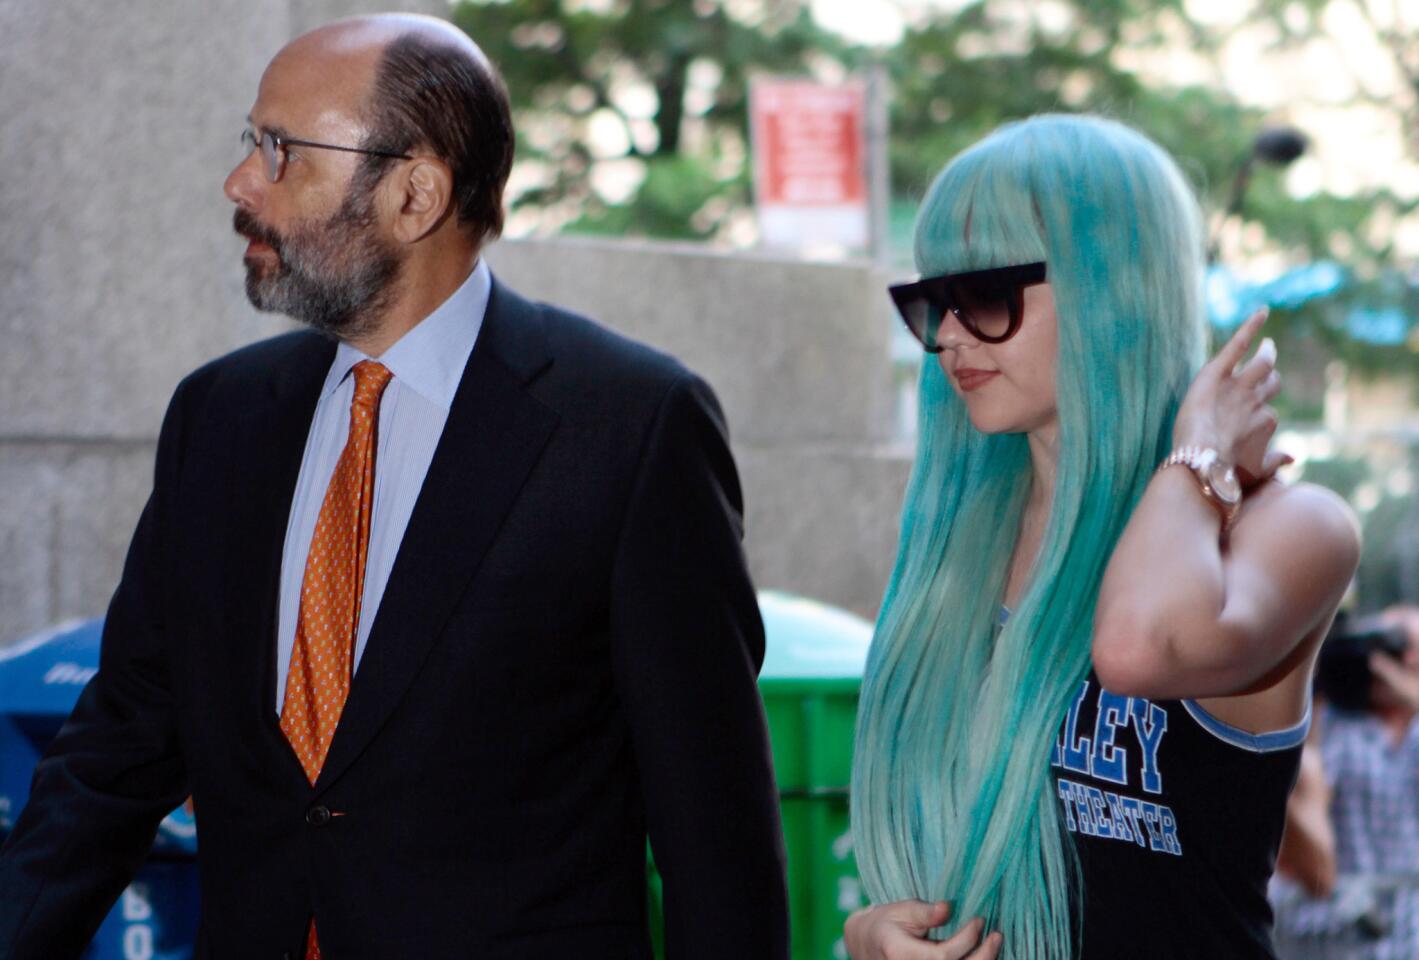 Amanda Bynes, accompanied by attorney Gerald Shargel, arrives for a court appearance in New York in 2013 on allegations that she chucked a marijuana bong out the window of her 36th-floor Manhattan apartment.